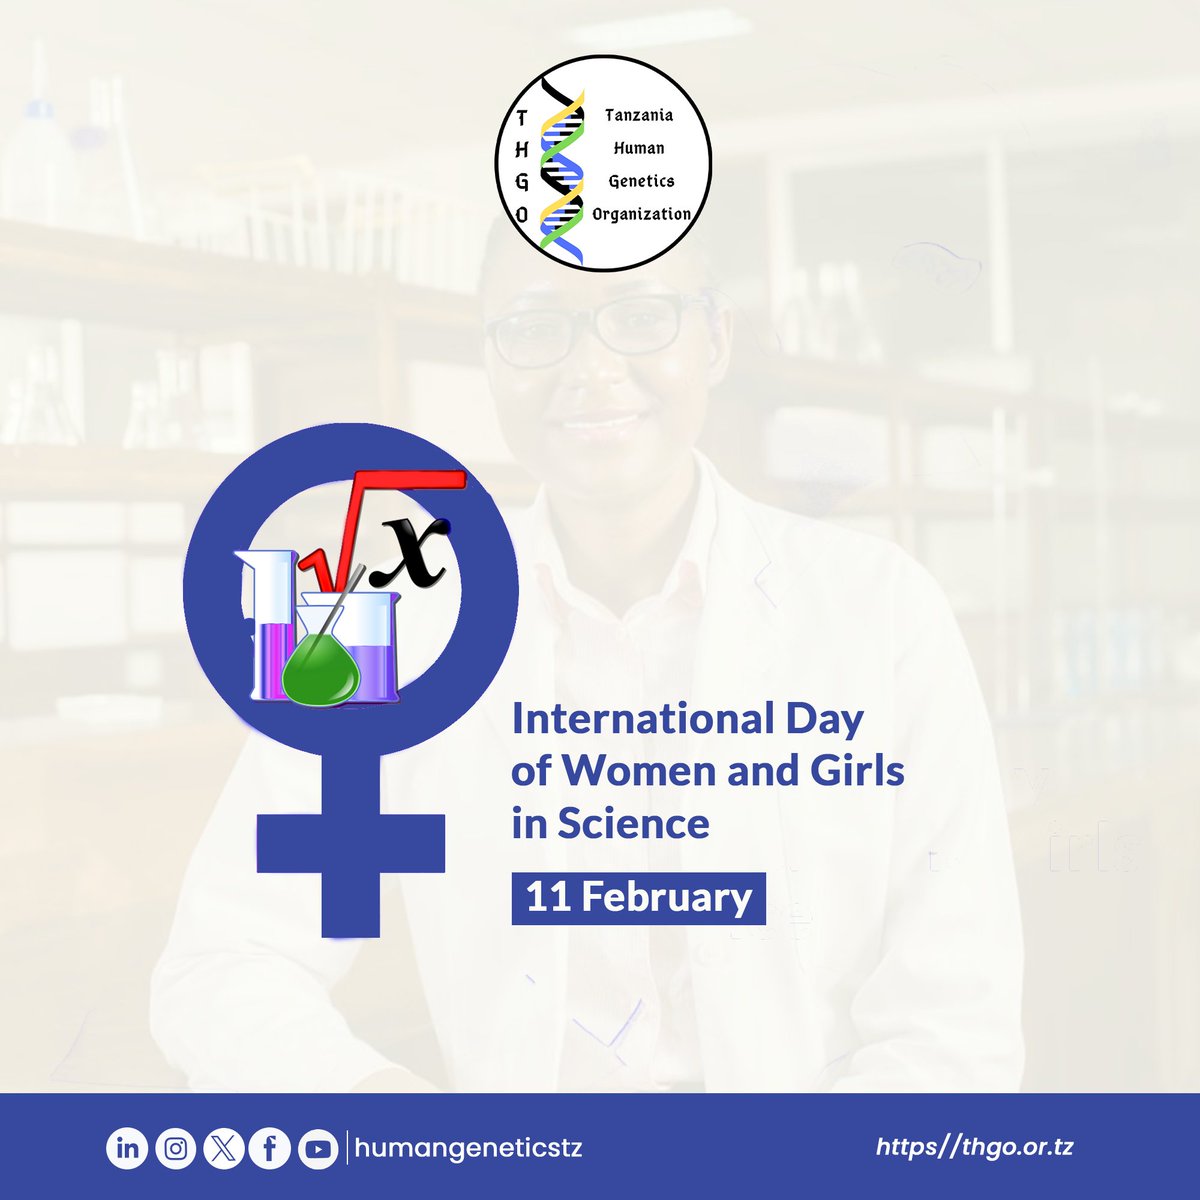 Happy international day of women and girls in science #IDWGS 

As we celebrate this day let us remember that:
👩‍🔬Women do science
👩‍🏭Women WANT to do science
👩‍⚕️Science needs women
#humangenetics